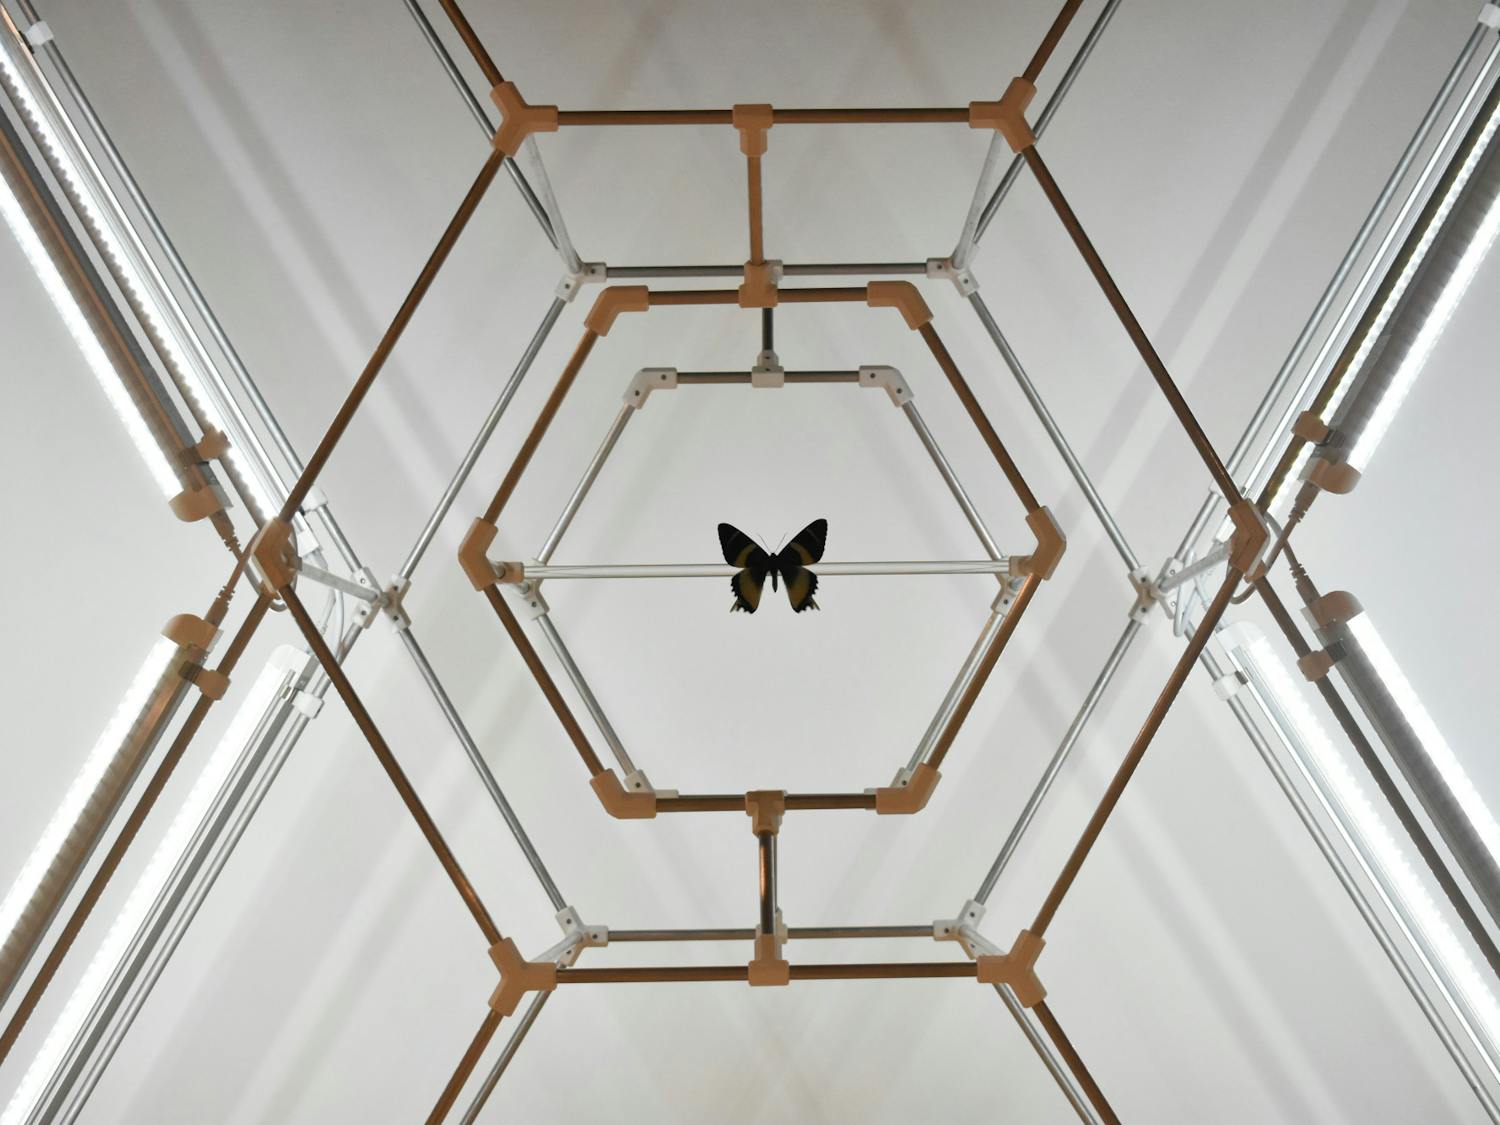 "Anthropocene Hex Sign" by Eli Kessler uses the butterfly species Parnassius Phoebus and Alcides Orontes to create a hive-like structure housing the butterflies. The sculpture is created with aluminum, 3D-printed PLA plastic and LED lights.